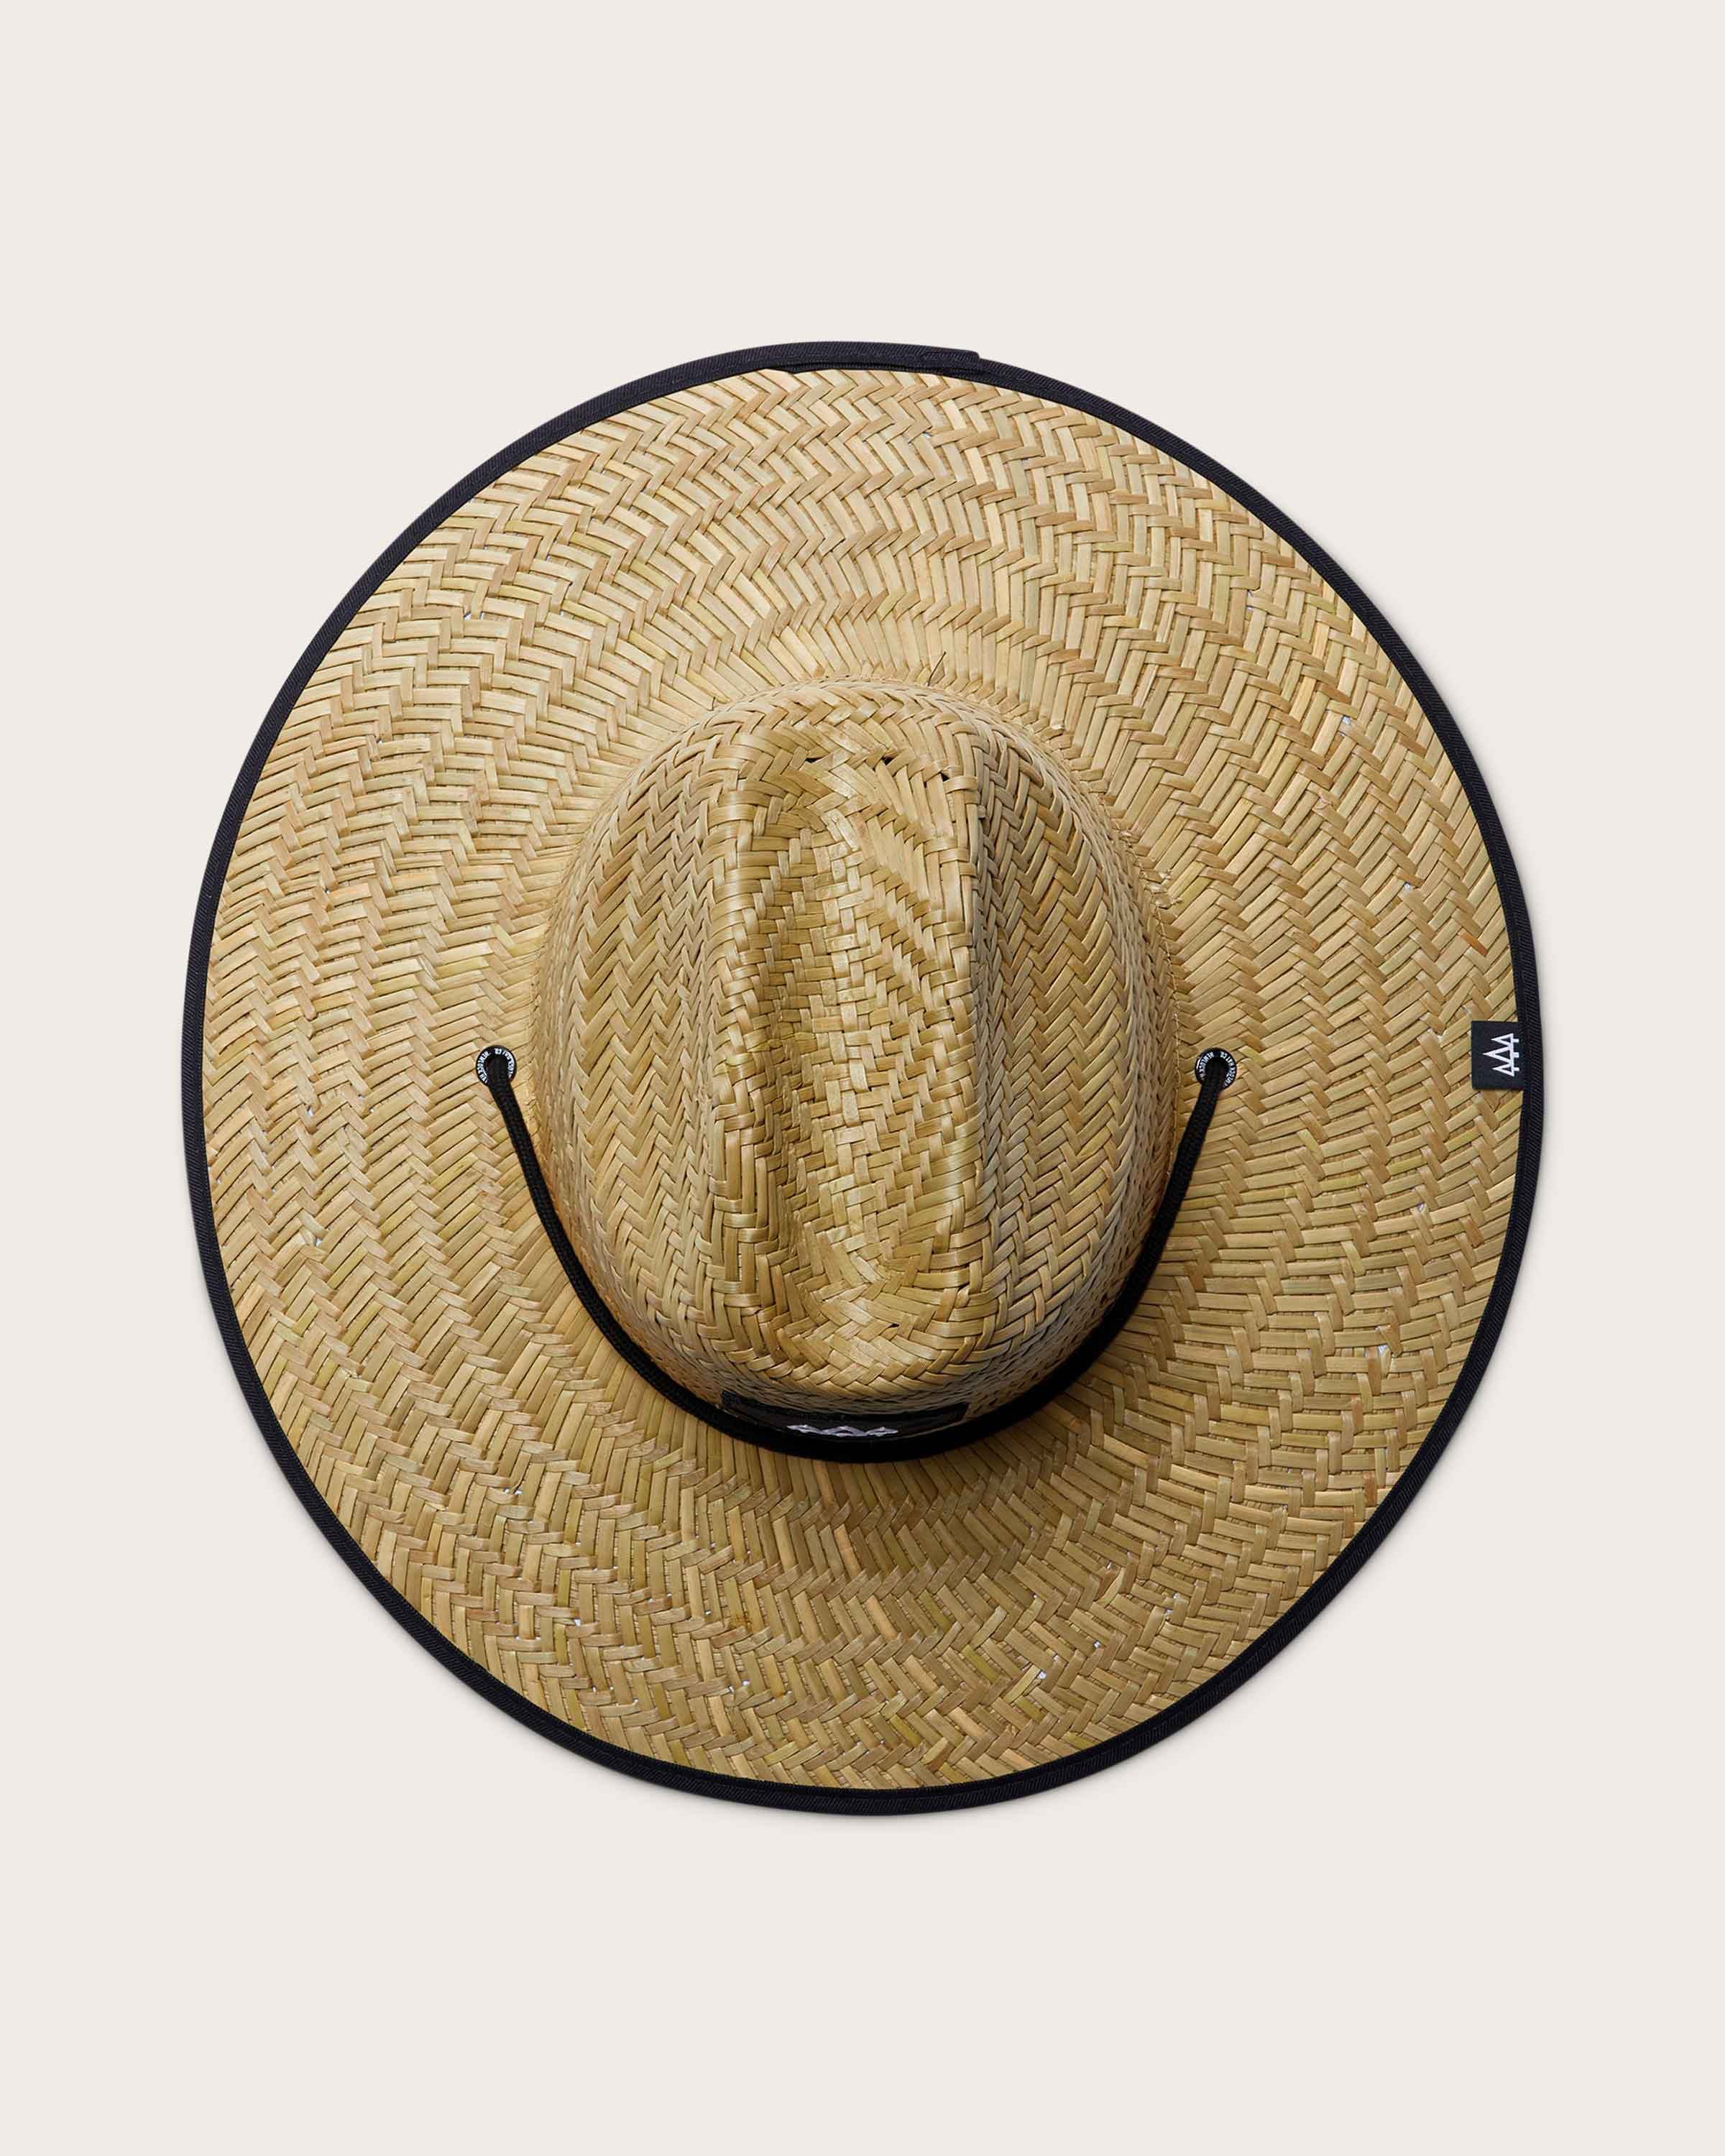 Midnight - undefined - Hemlock Hat Co. Lifeguards - Adults